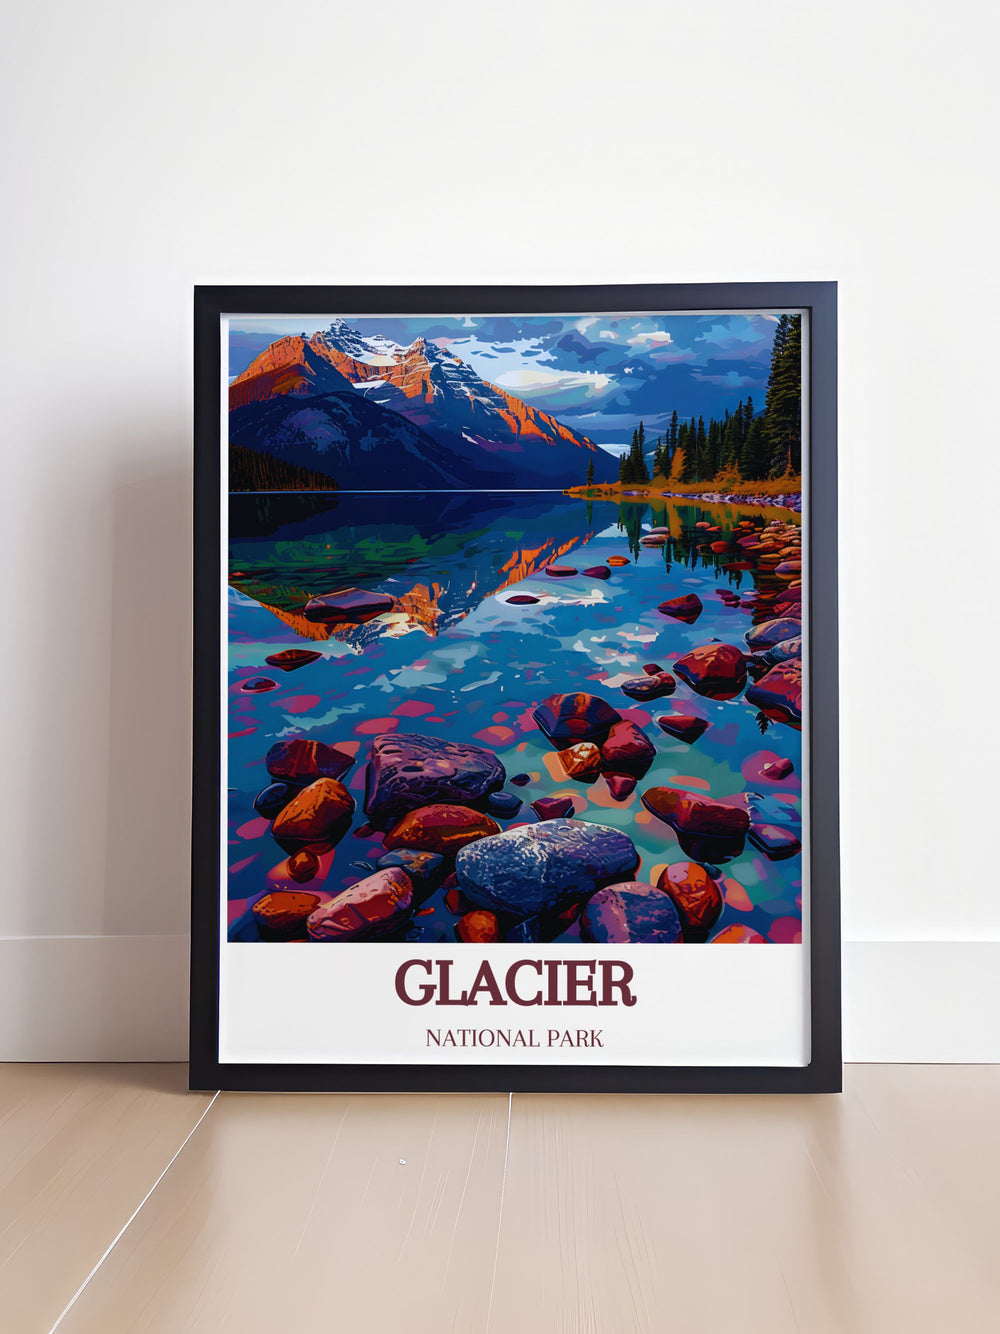 This artistic poster captures the stunning landscapes of Glacier National Park, highlighting its rugged mountains and pristine lakes. Ideal for nature lovers, this artwork brings the parks natural beauty into your home decor.